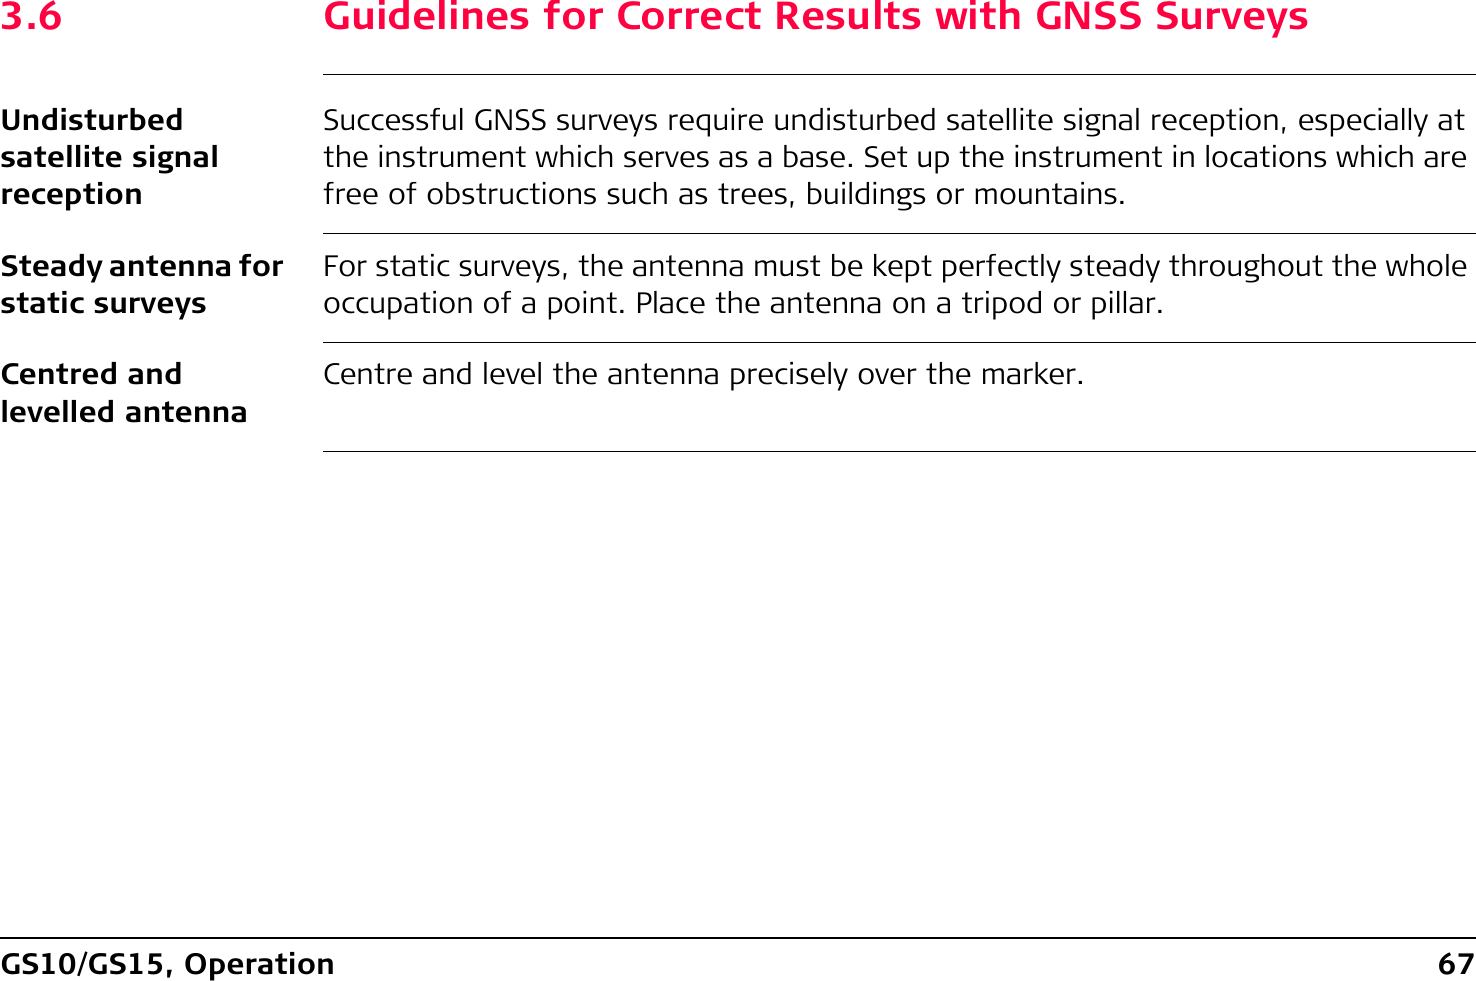 GS10/GS15, Operation 673.6 Guidelines for Correct Results with GNSS SurveysUndisturbed satellite signal receptionSuccessful GNSS surveys require undisturbed satellite signal reception, especially at the instrument which serves as a base. Set up the instrument in locations which are free of obstructions such as trees, buildings or mountains.Steady antenna for static surveysFor static surveys, the antenna must be kept perfectly steady throughout the whole occupation of a point. Place the antenna on a tripod or pillar.Centred and levelled antennaCentre and level the antenna precisely over the marker.